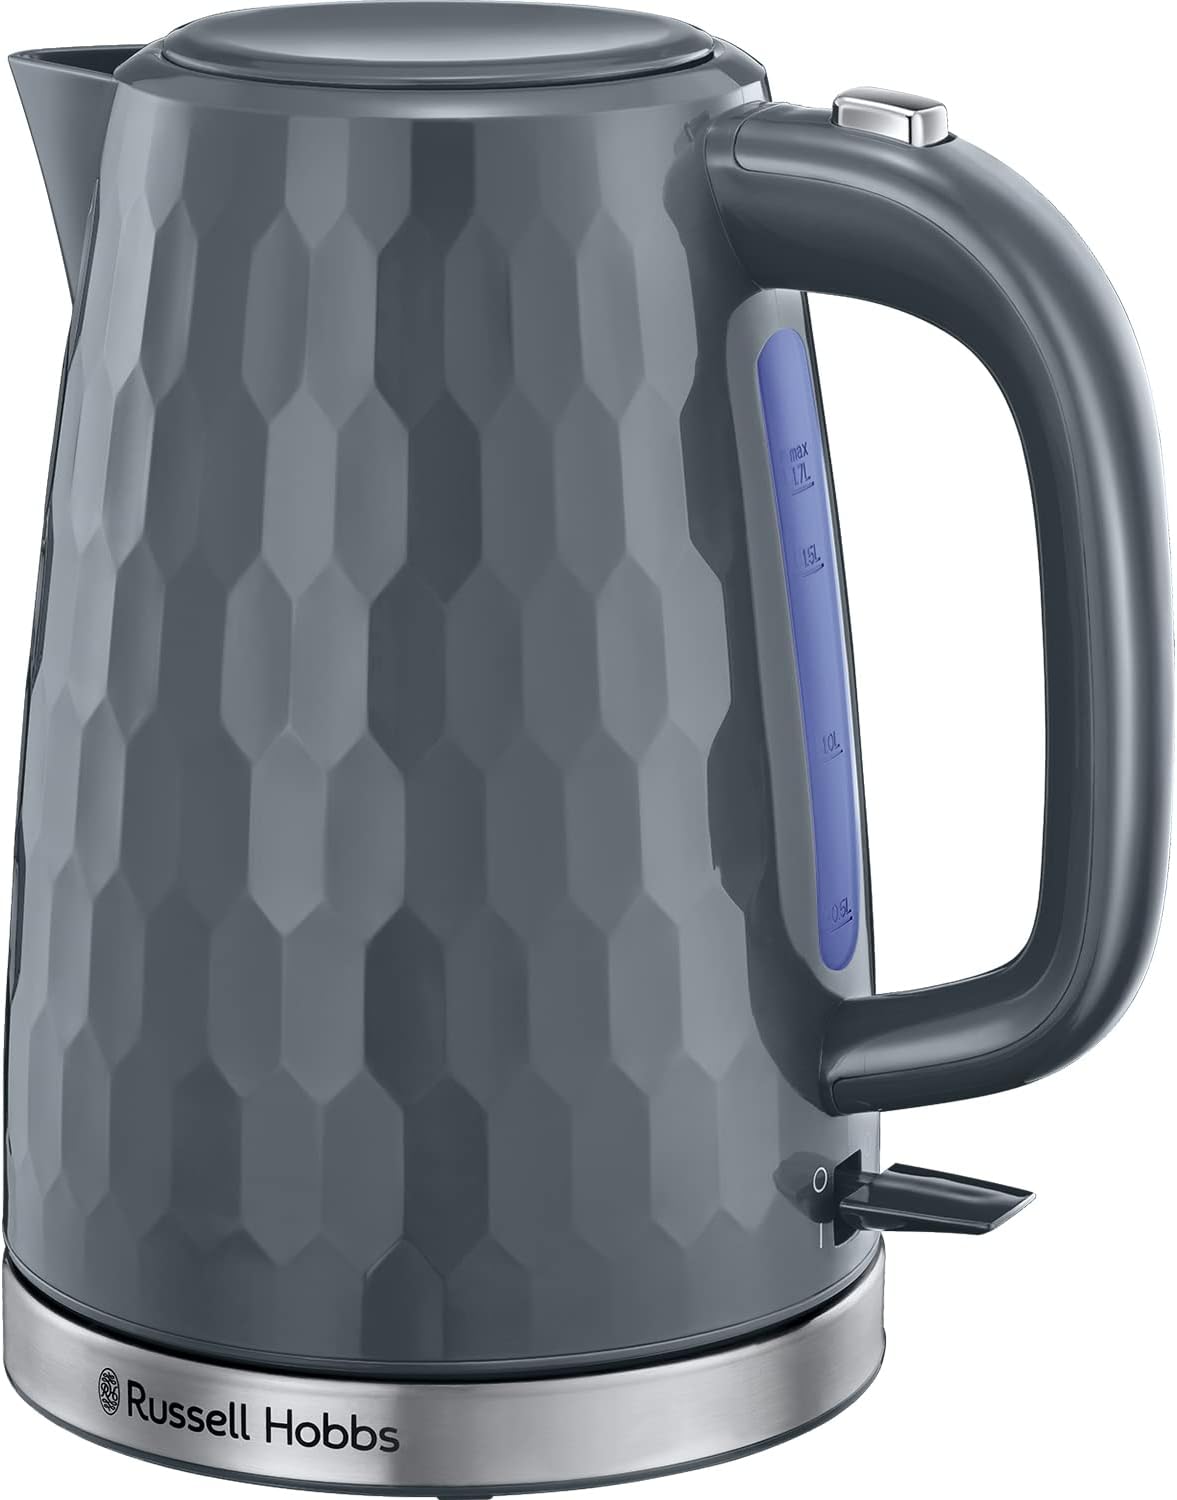 Russell Hobbs Honeycomb Electric 1.7L Cordless Kettle (Fast Boil 3KW, Black premium plastic, matt & high gloss finish, Removable washable anti - scale filter, Push button lid, Perfect pour spout) 26051 - Amazing Gadgets Outlet